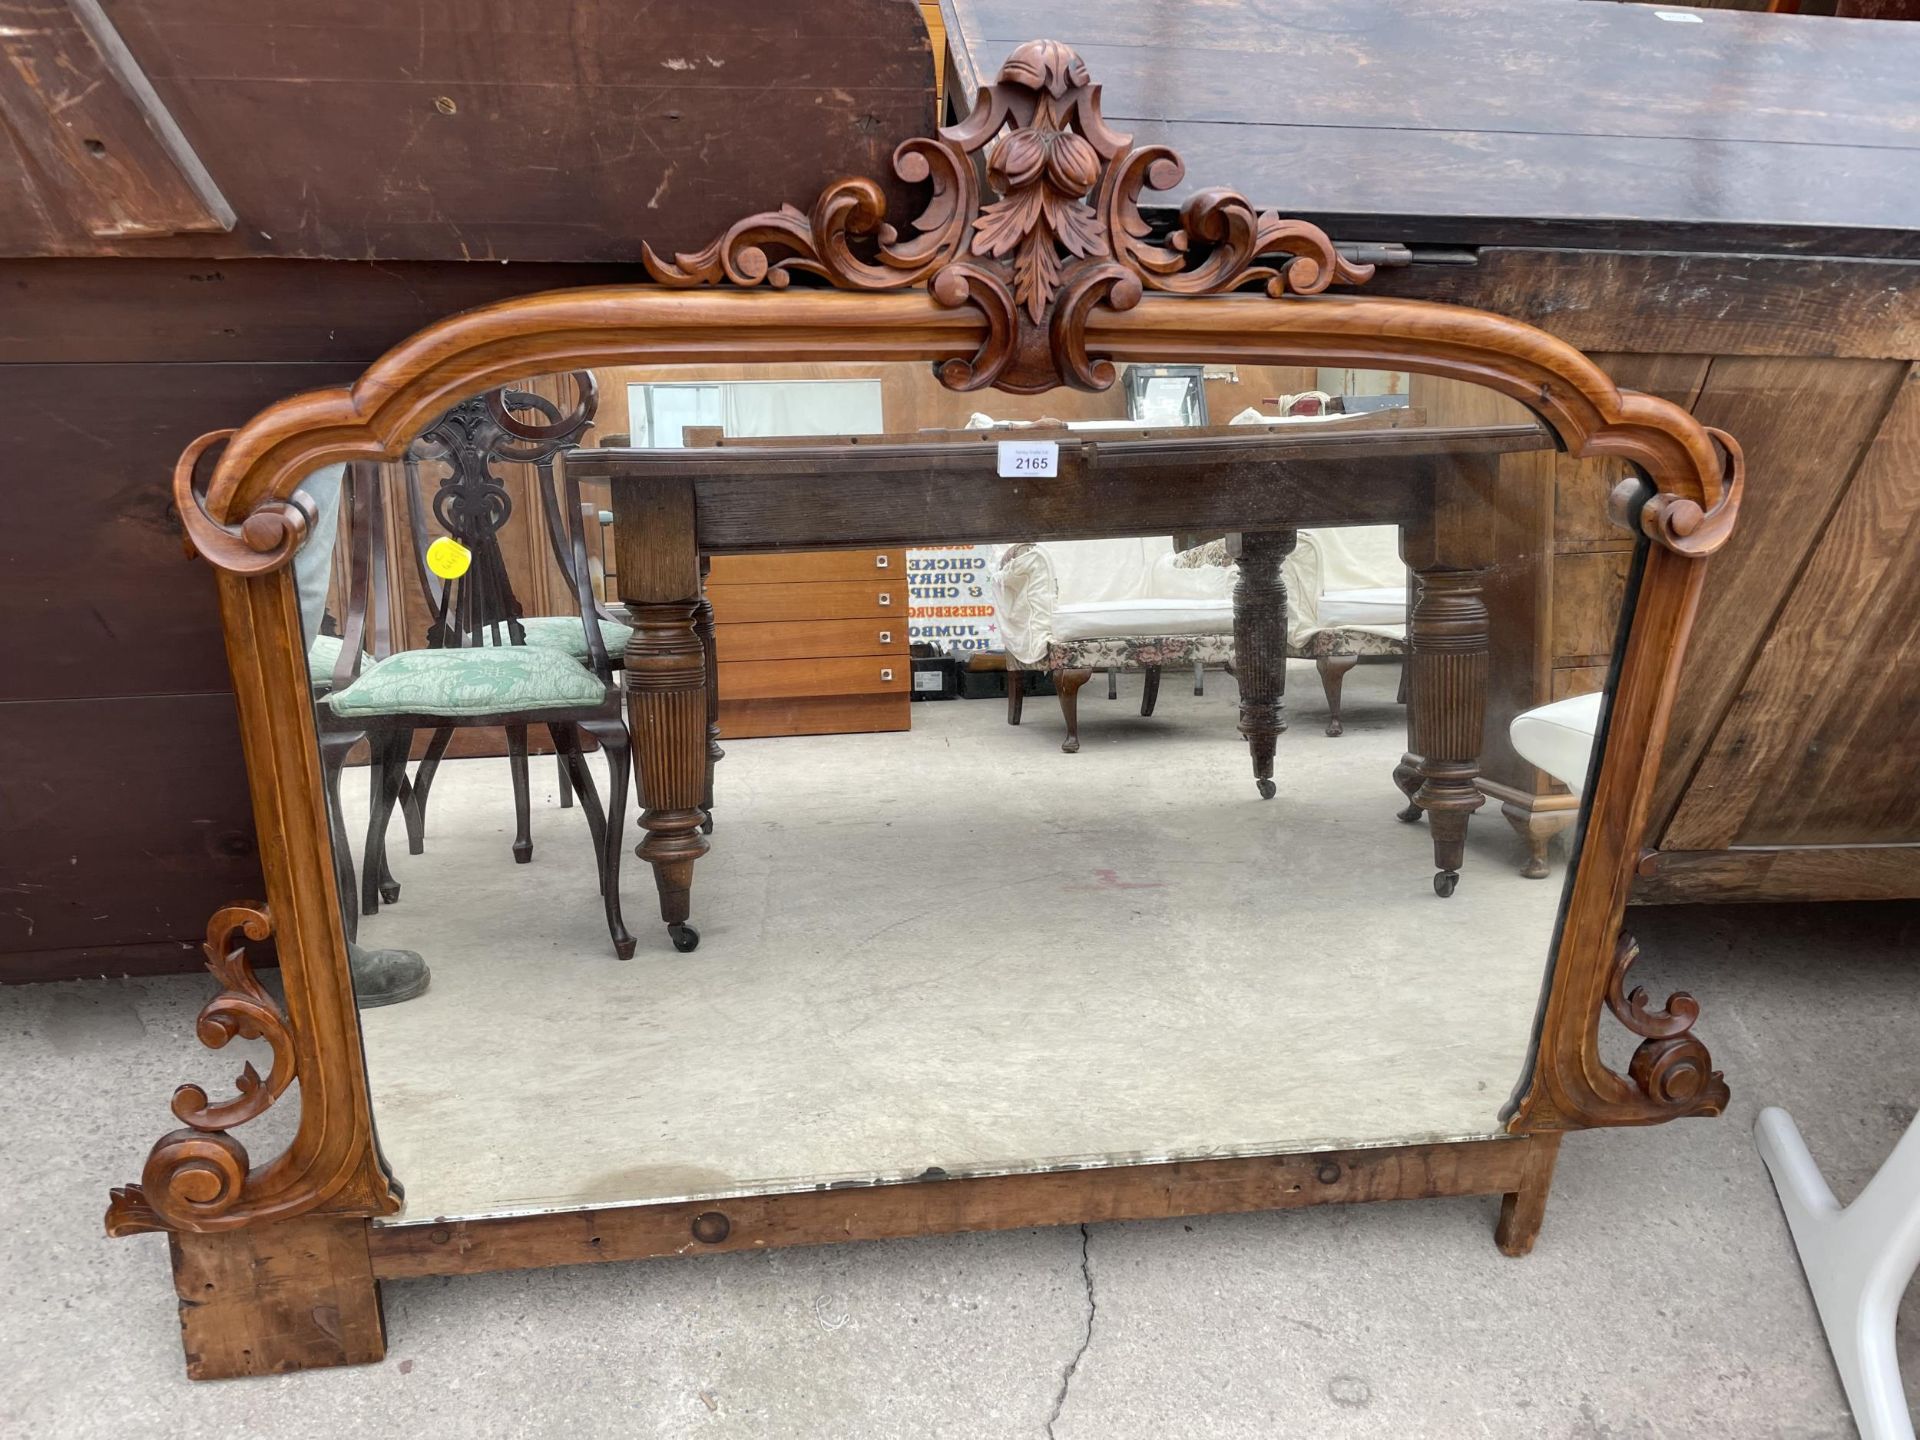 A VICTORIAN WALNUT OVERMANTEL/CHIFFONIER MIRROR, 51" WIDE, WITH FOLIATE CARVING